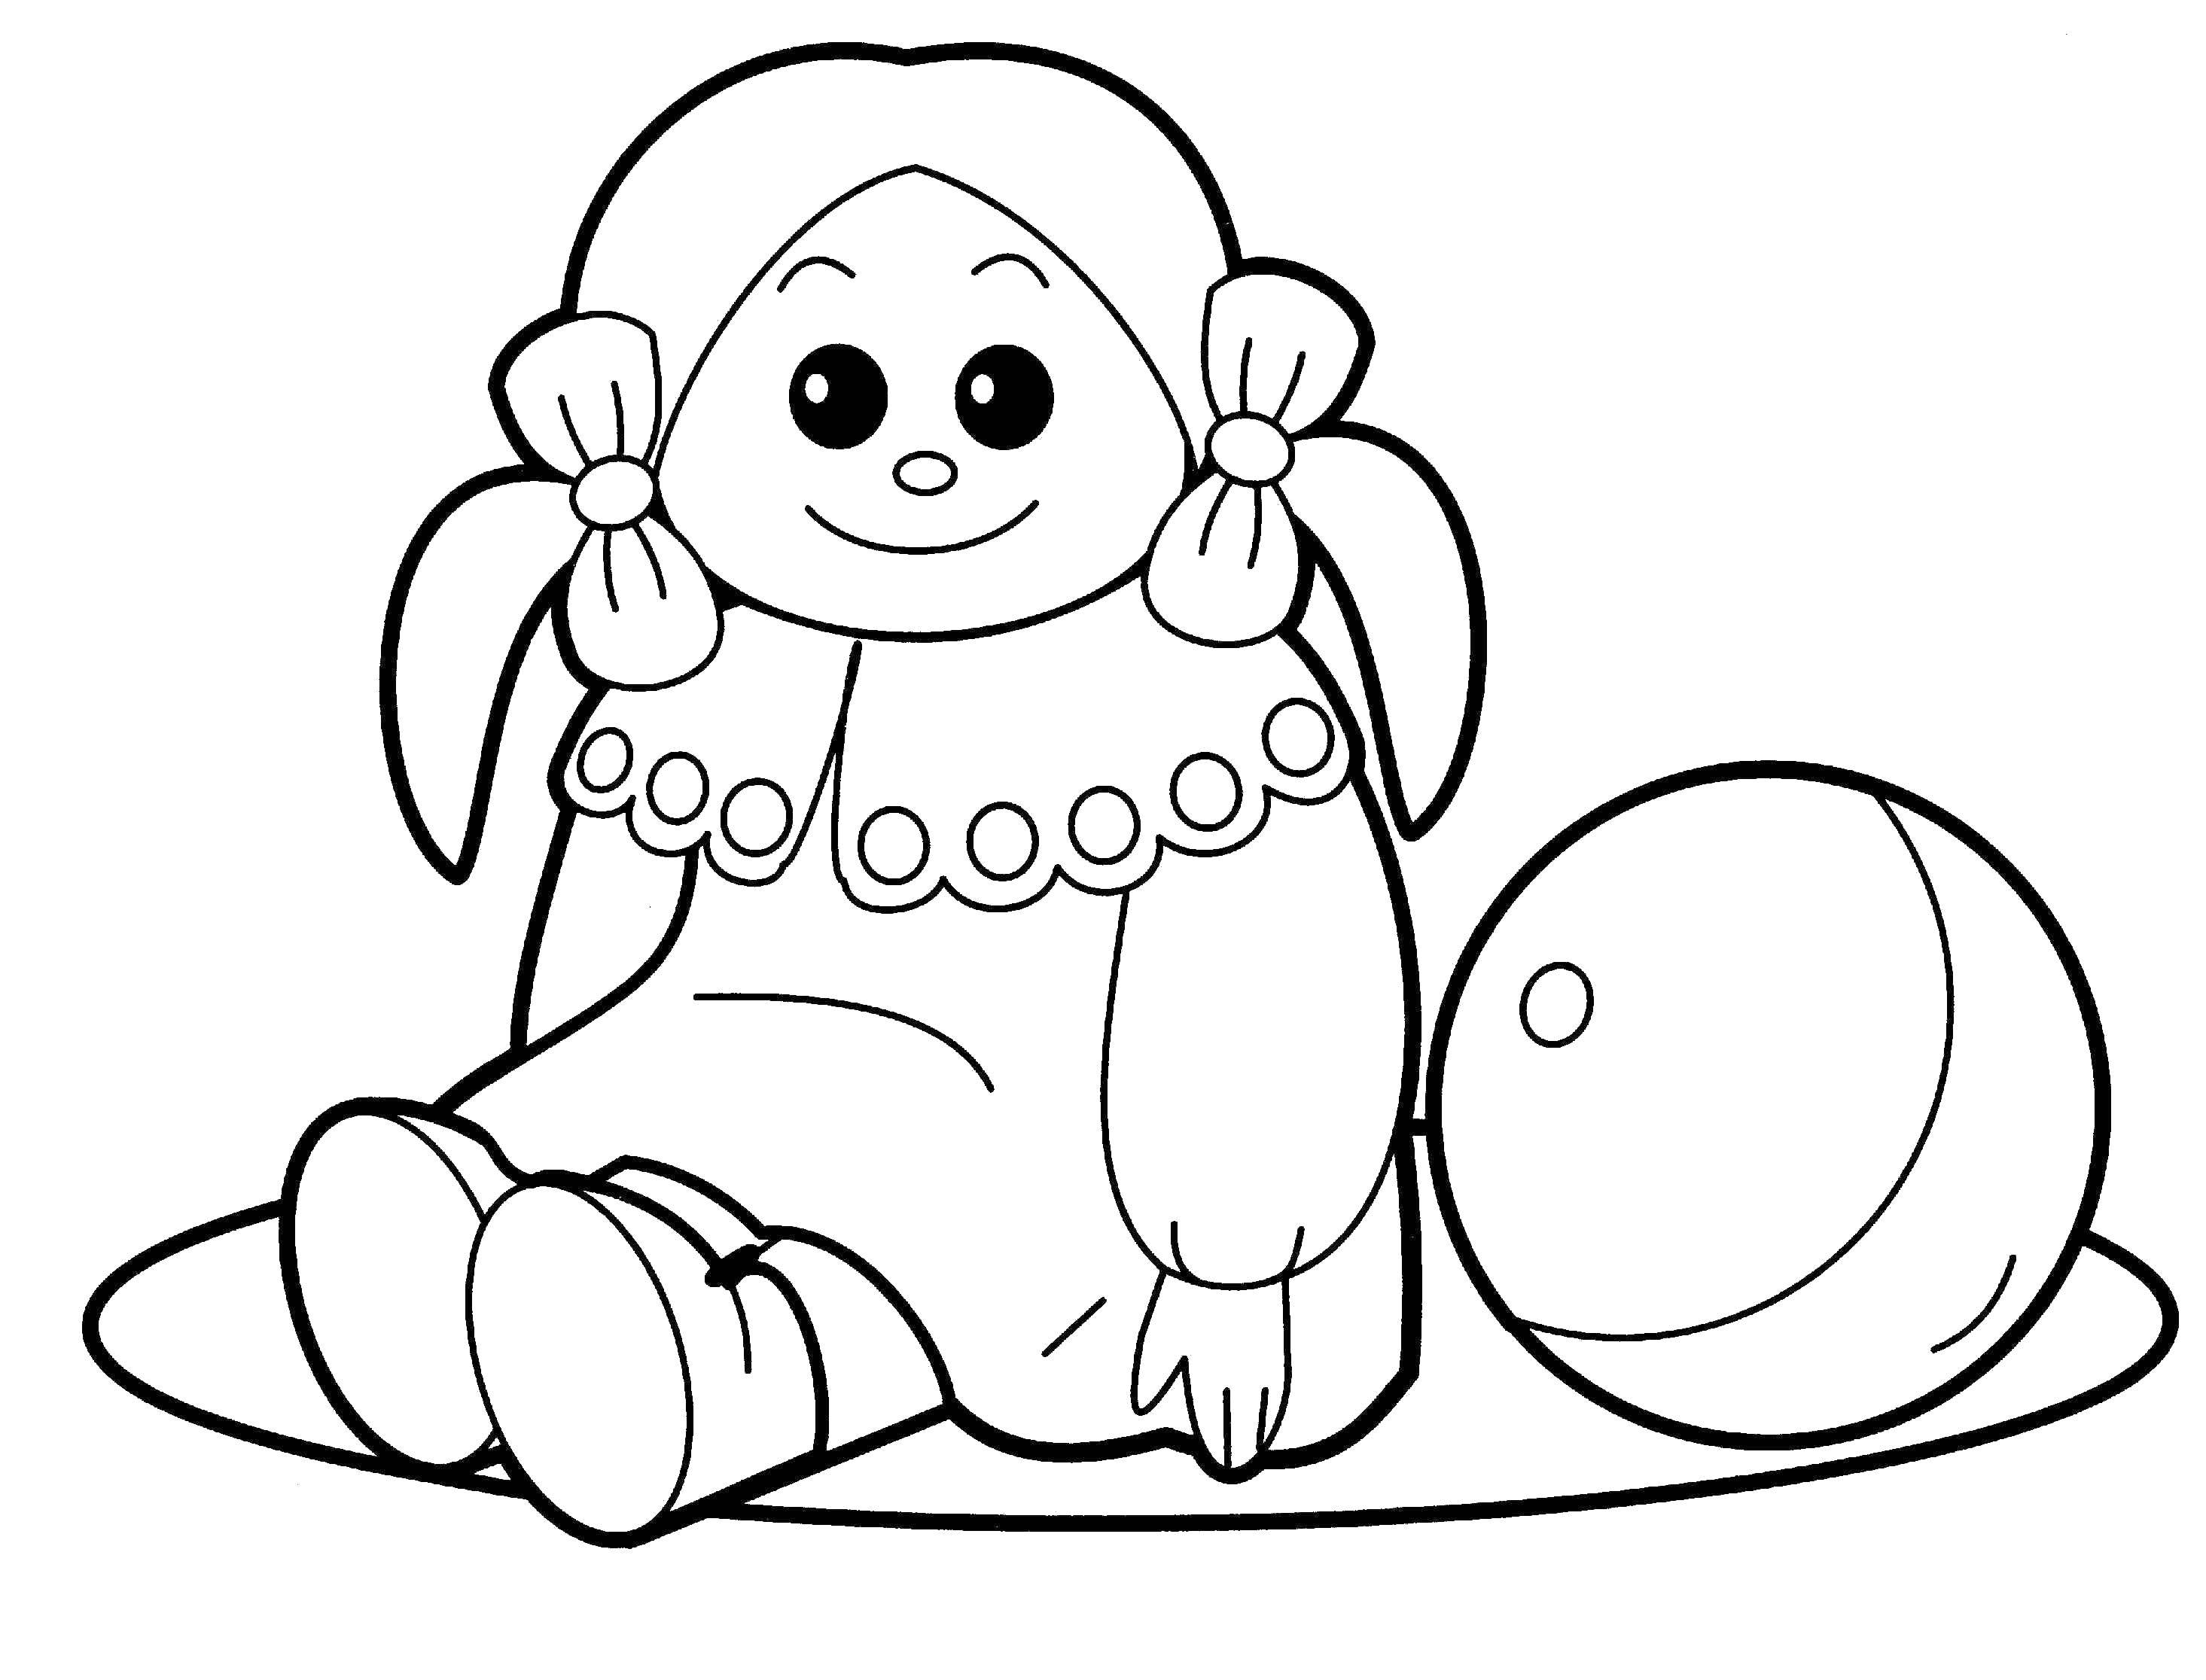 Coloring Doll and ball. Category Dolls. Tags:  doll, ball, toy.